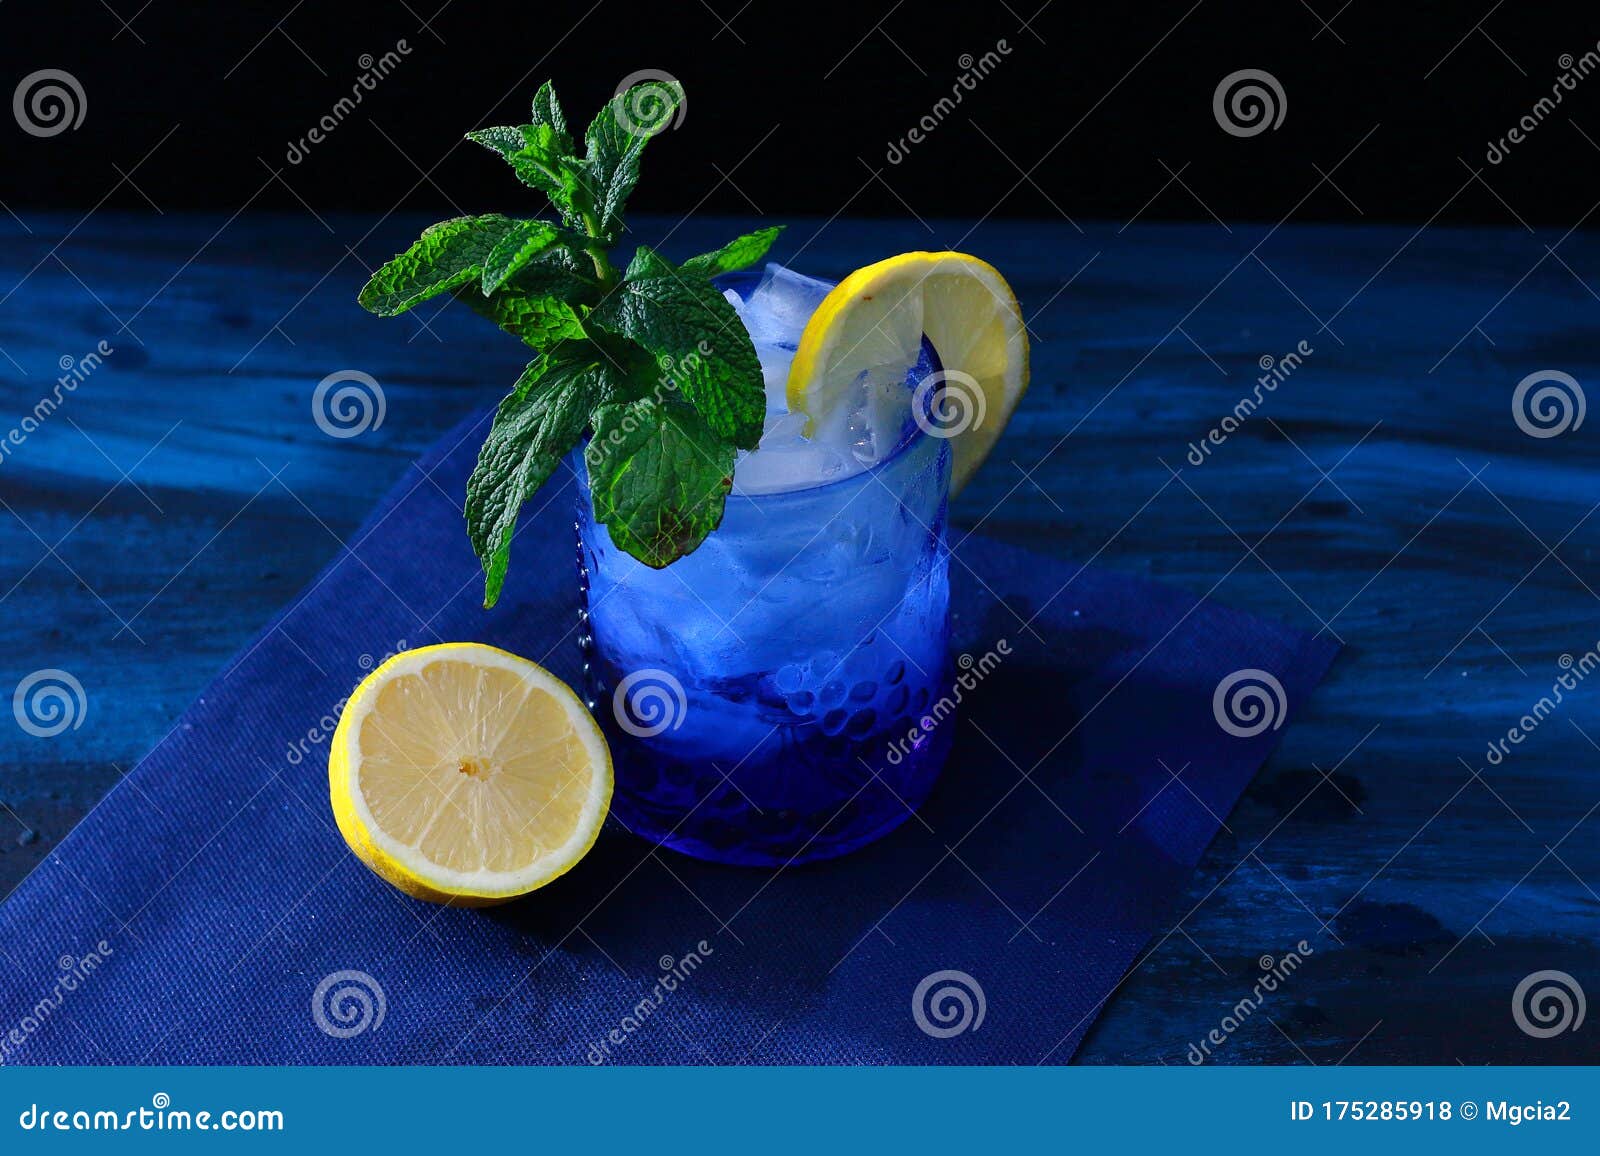 mojito with lemon and good herb, refreshing drink